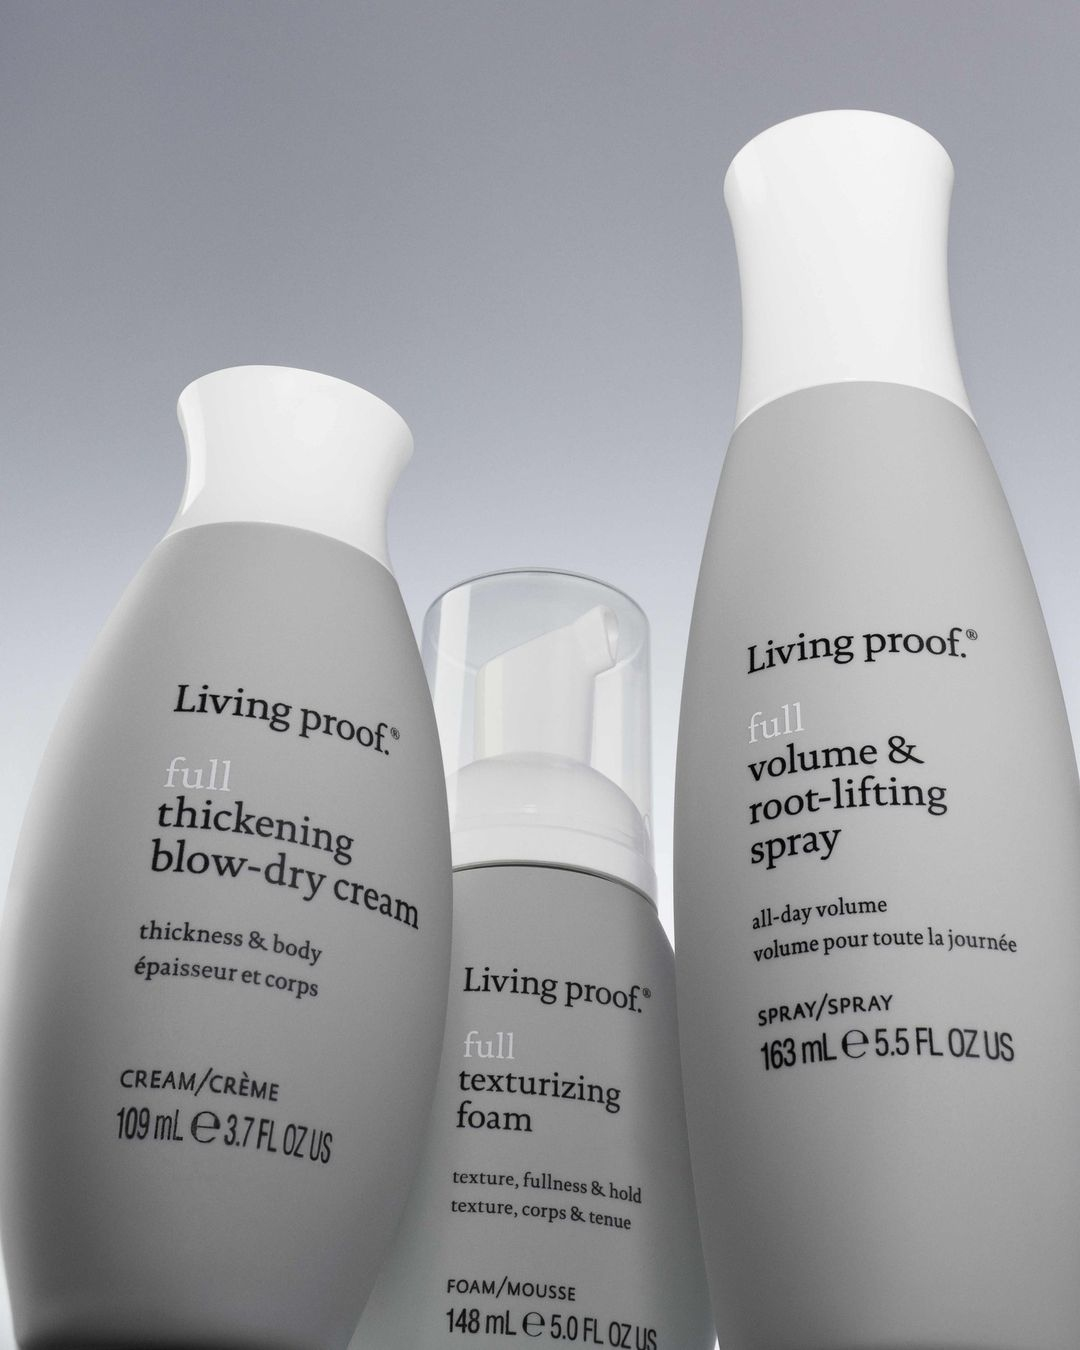 New launches from Living Proof